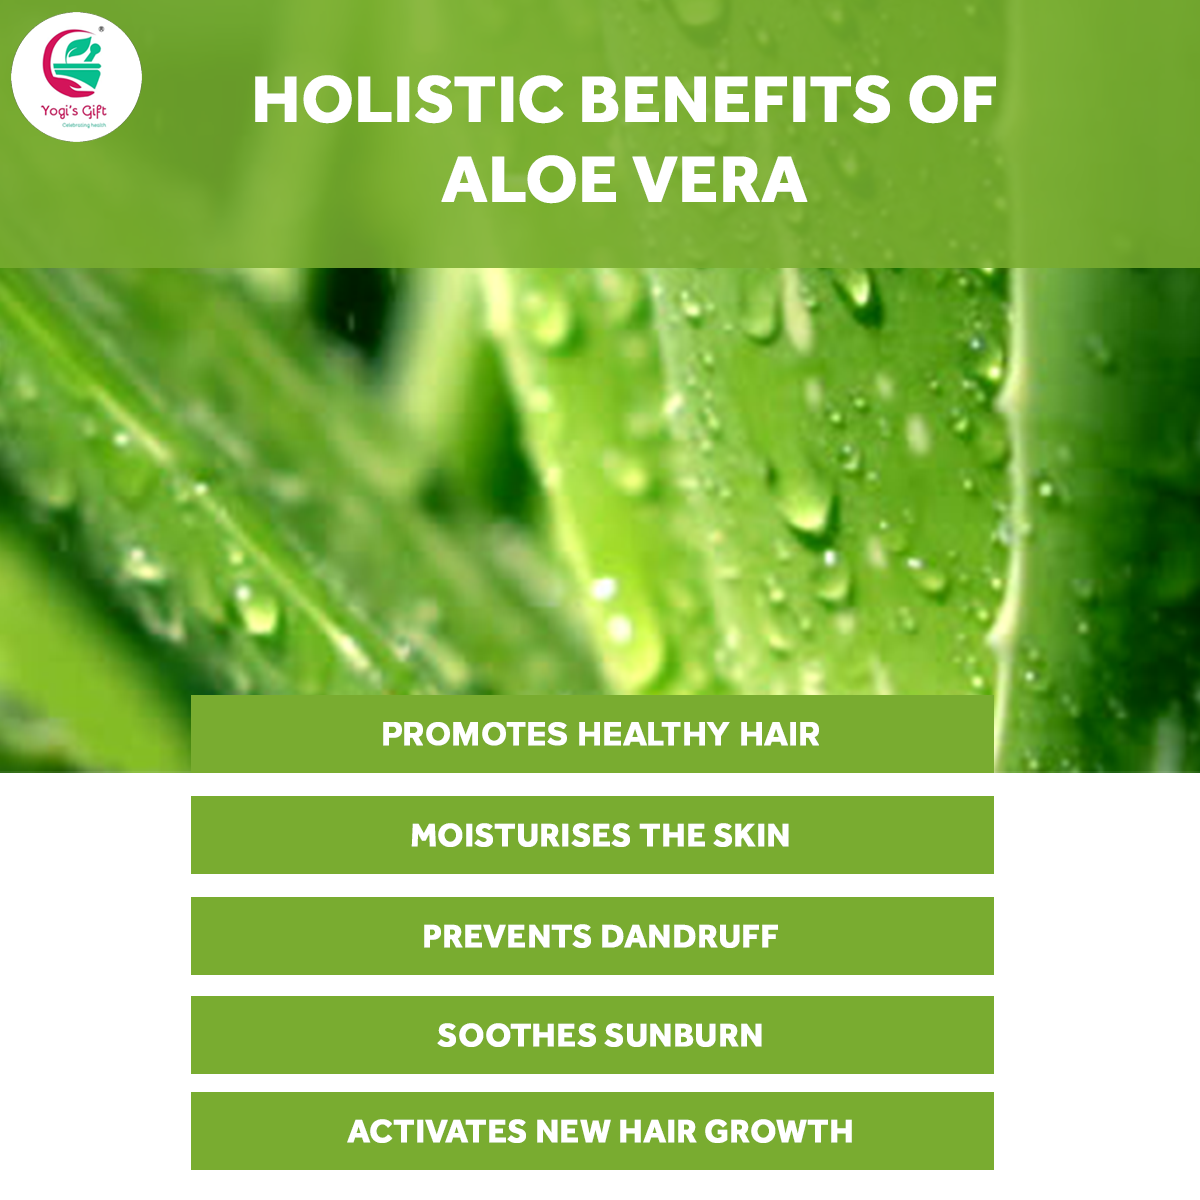 Aloe vera powder | 250 grams | Moisturizing face mask ingredient for dry skin | Hair mask ingredient for Hair growth | Made from Pure & Organically Cultivated Aloevera | by Yogi’s Gift®